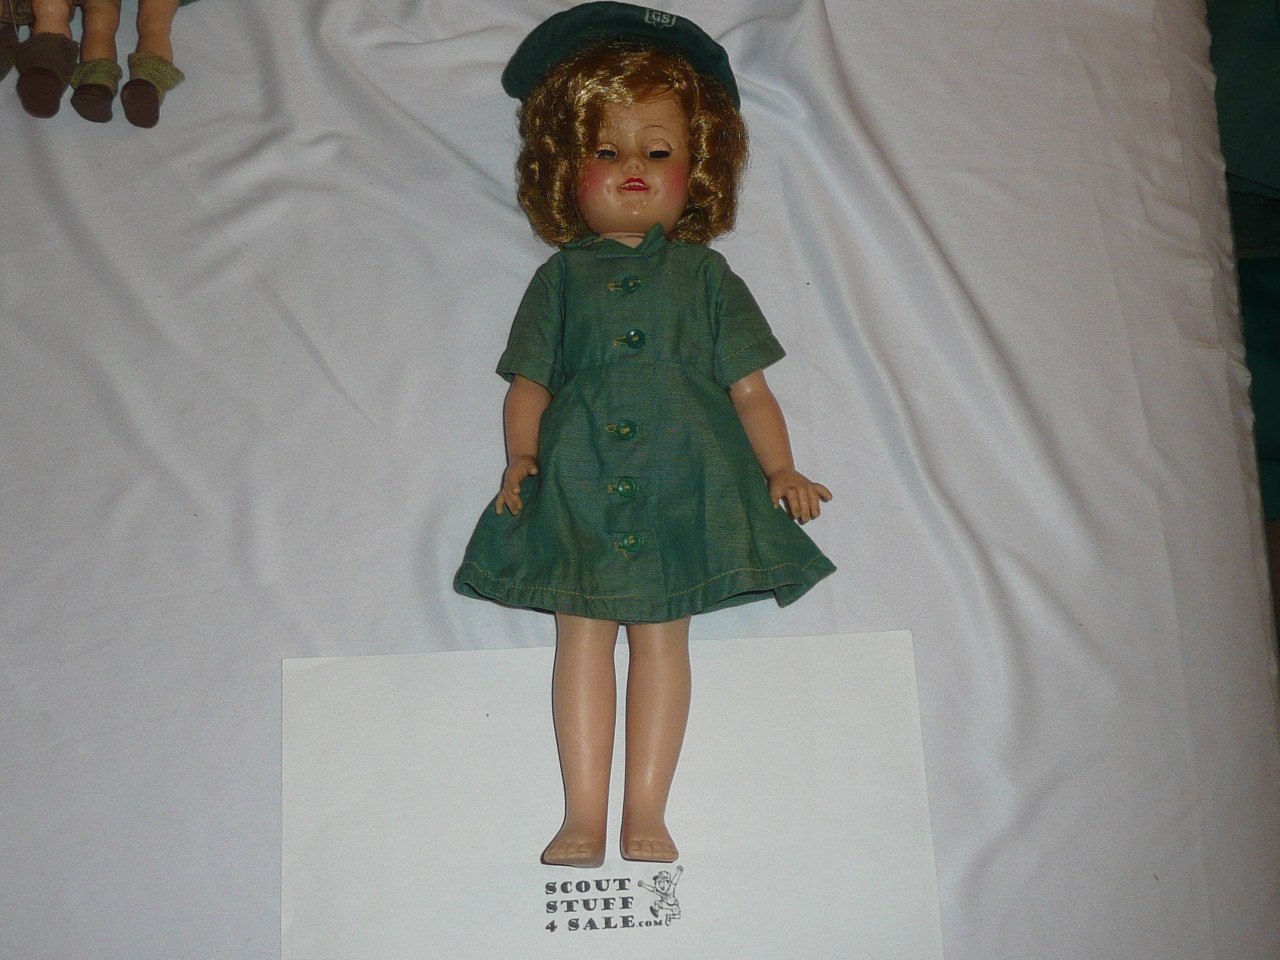 1950's Girl Scout 14.5" Doll from Ideal Doll Company, RARE